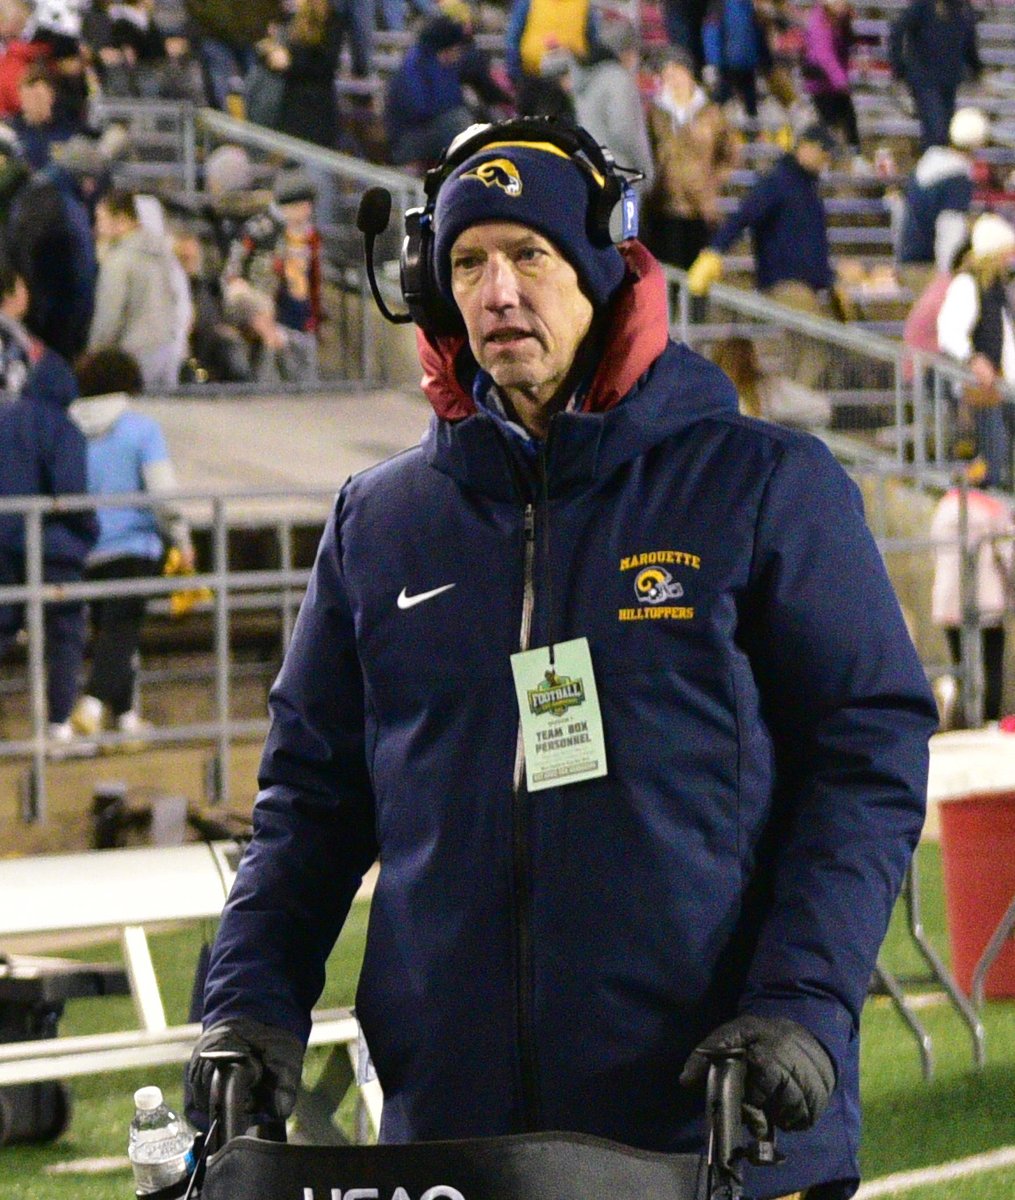 The Marquette Football Family lost an amazing person on Friday. Coach Jeff Bolle went home to our Lord after a courageous battle with cancer. Jeff was the definition of “Man for Others.” He loved his players and was a tremendous role model! RIP Coach Bolle! We will miss you!